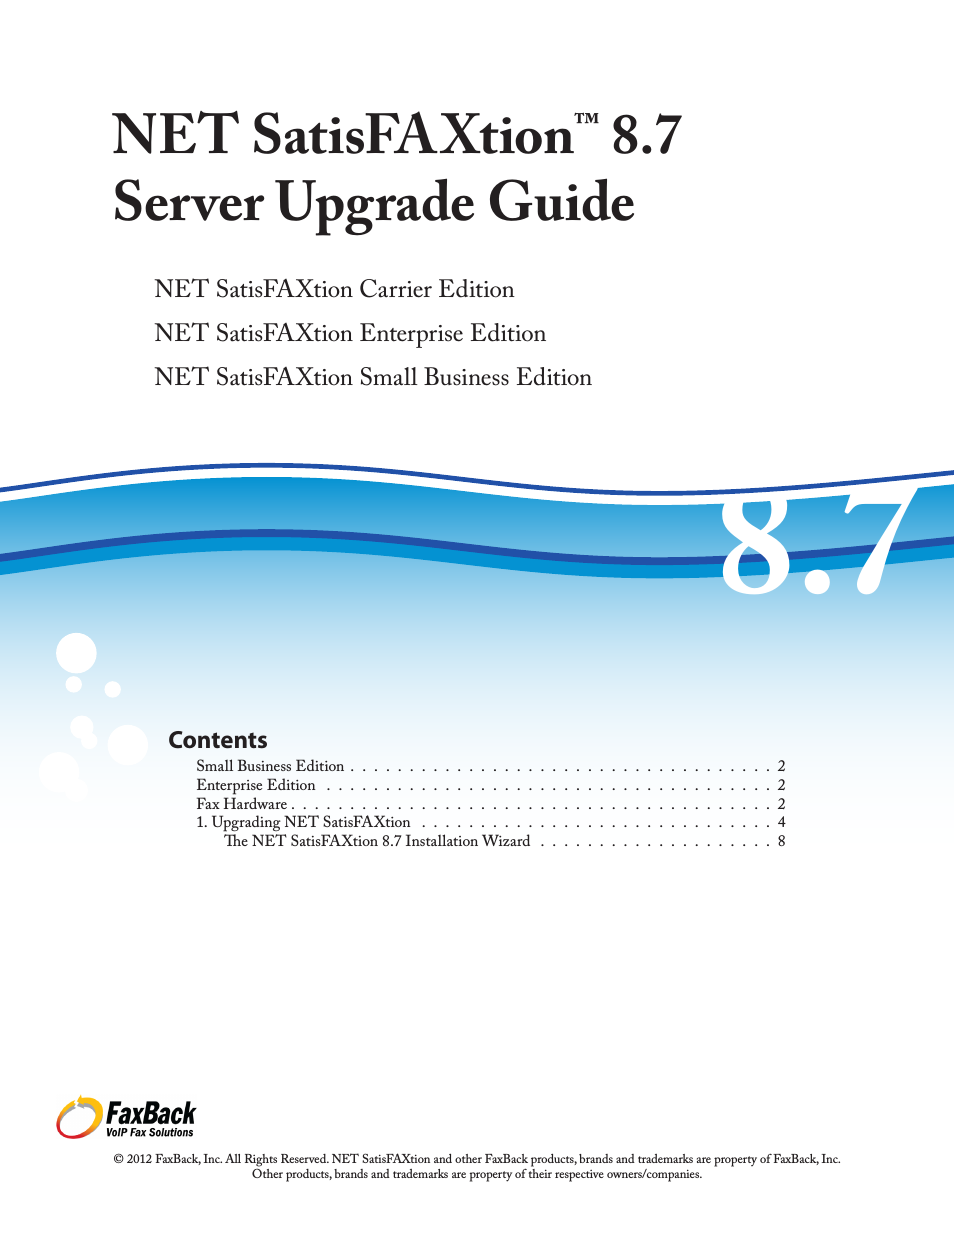 NET SatisFAXtion 8.7 (Including R3) - Upgrade Guide